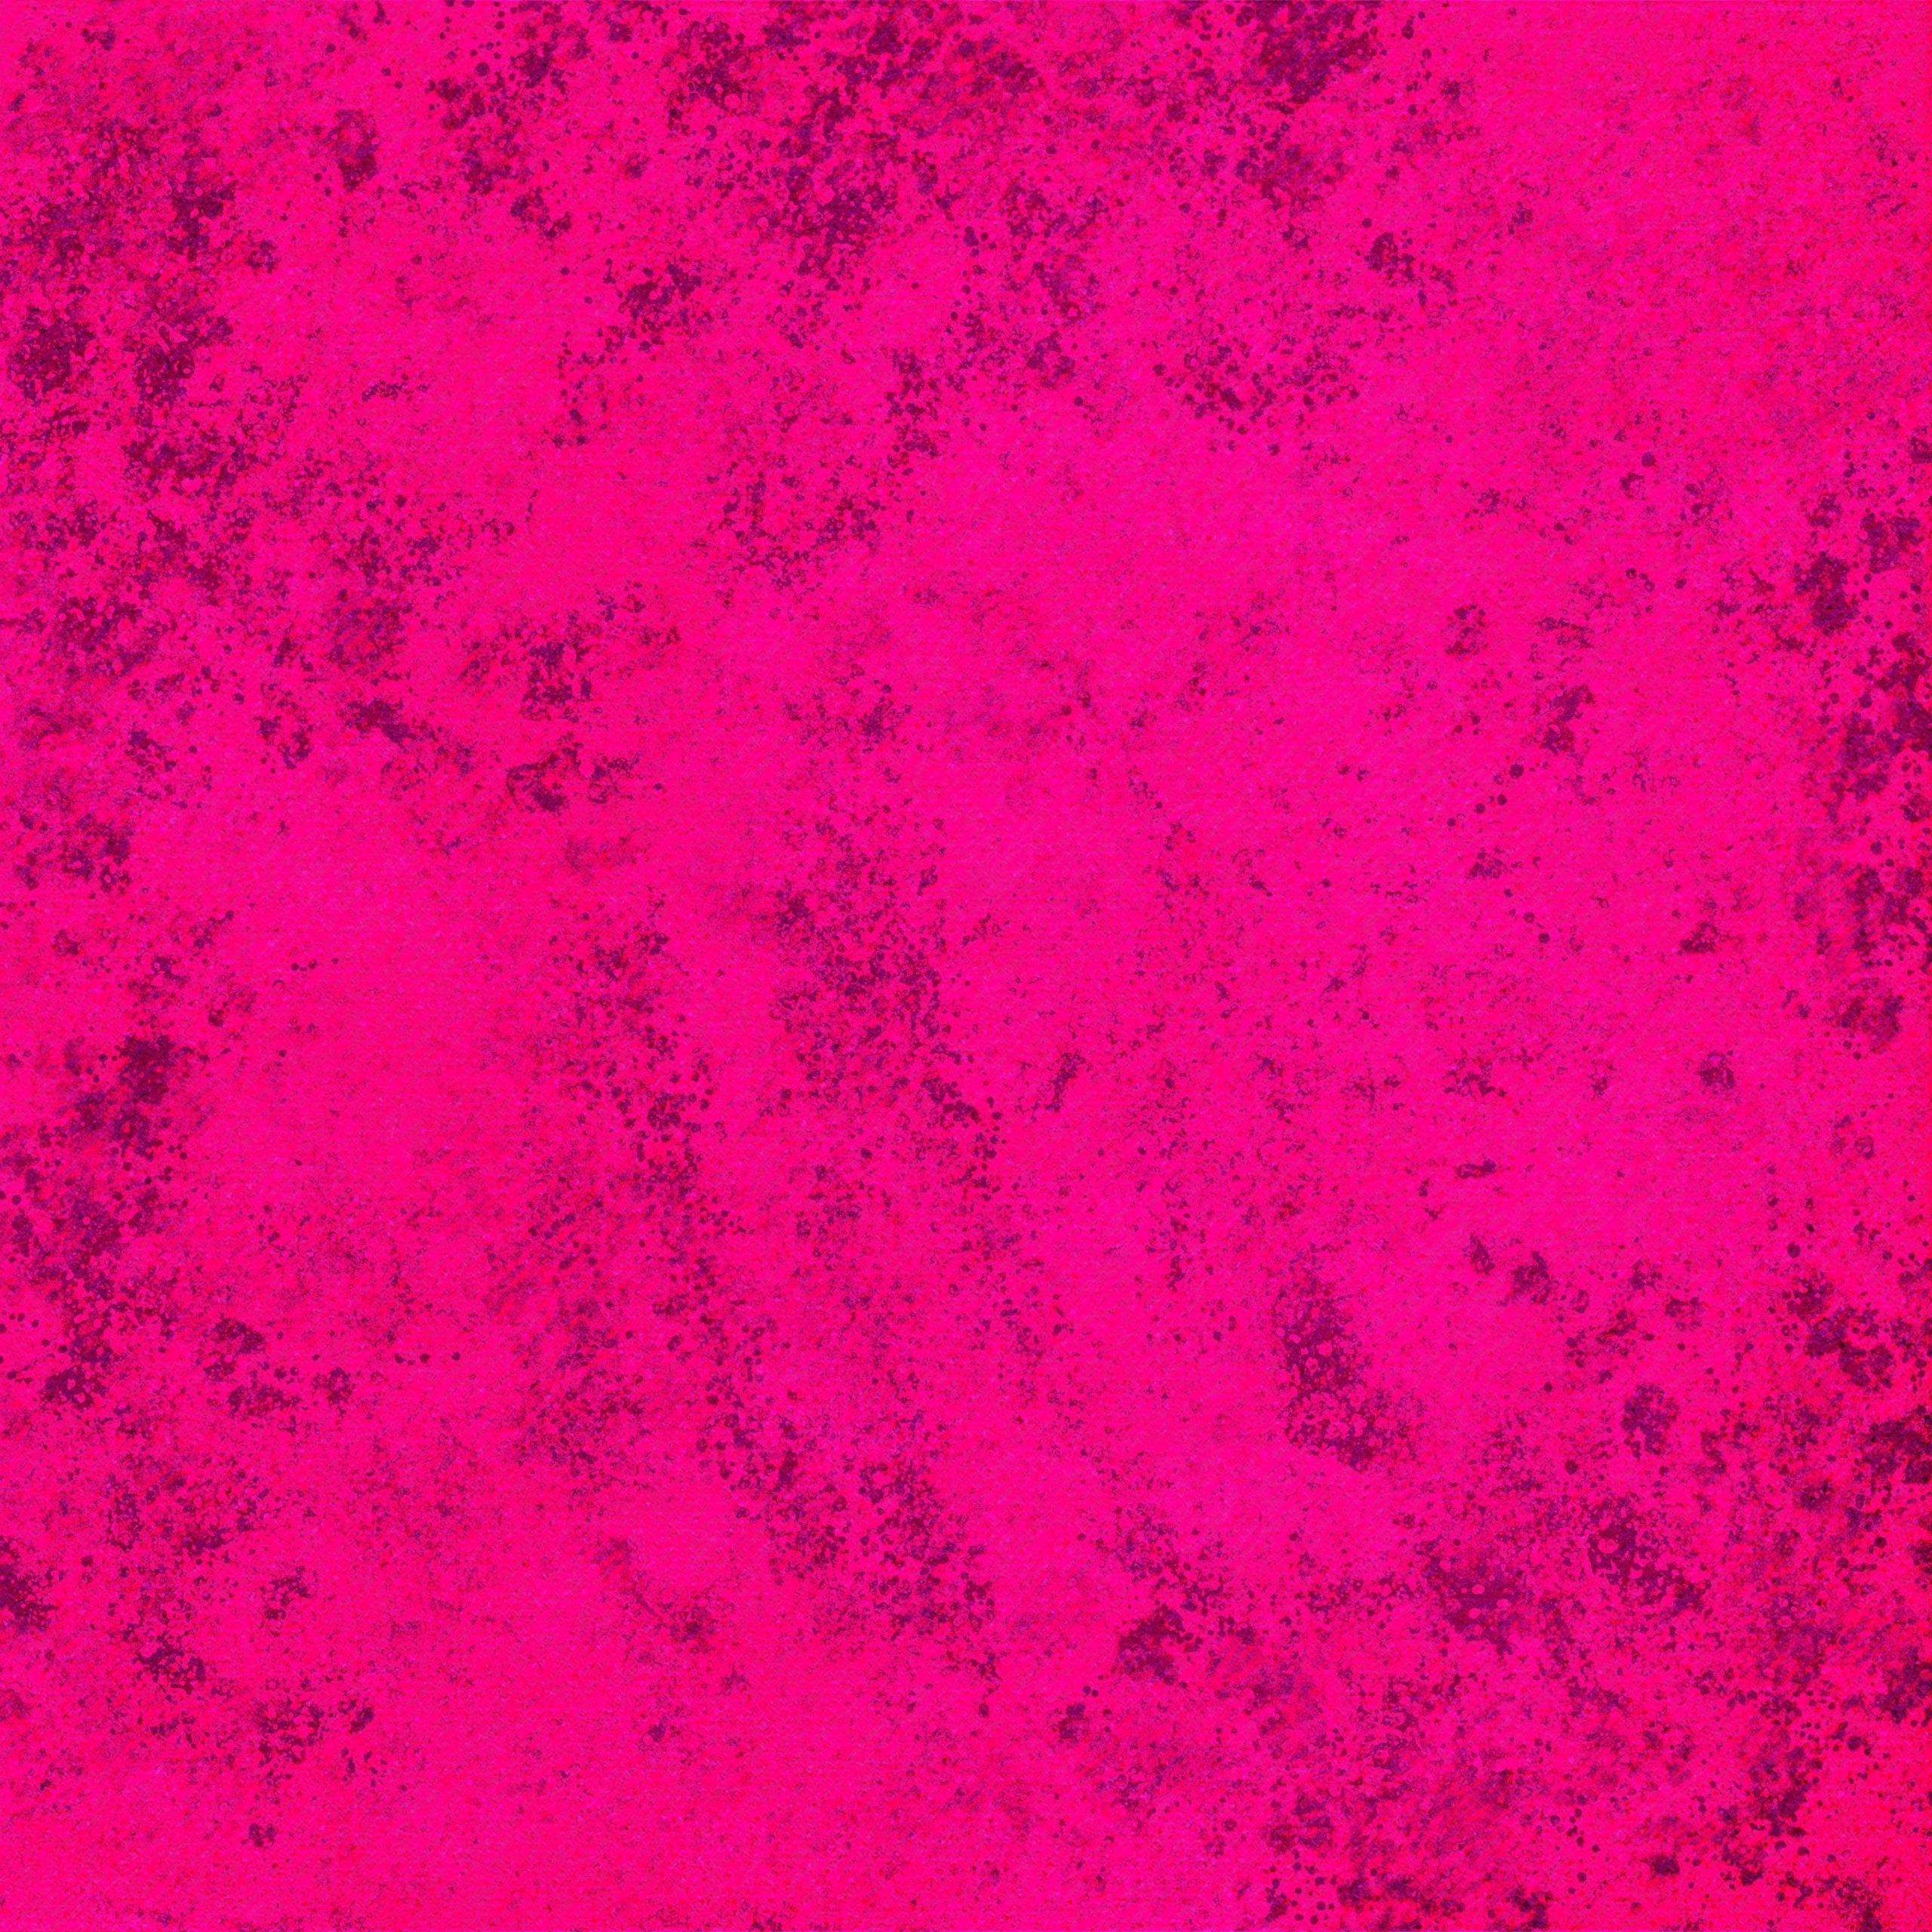 A pink background with a black border - Hot pink